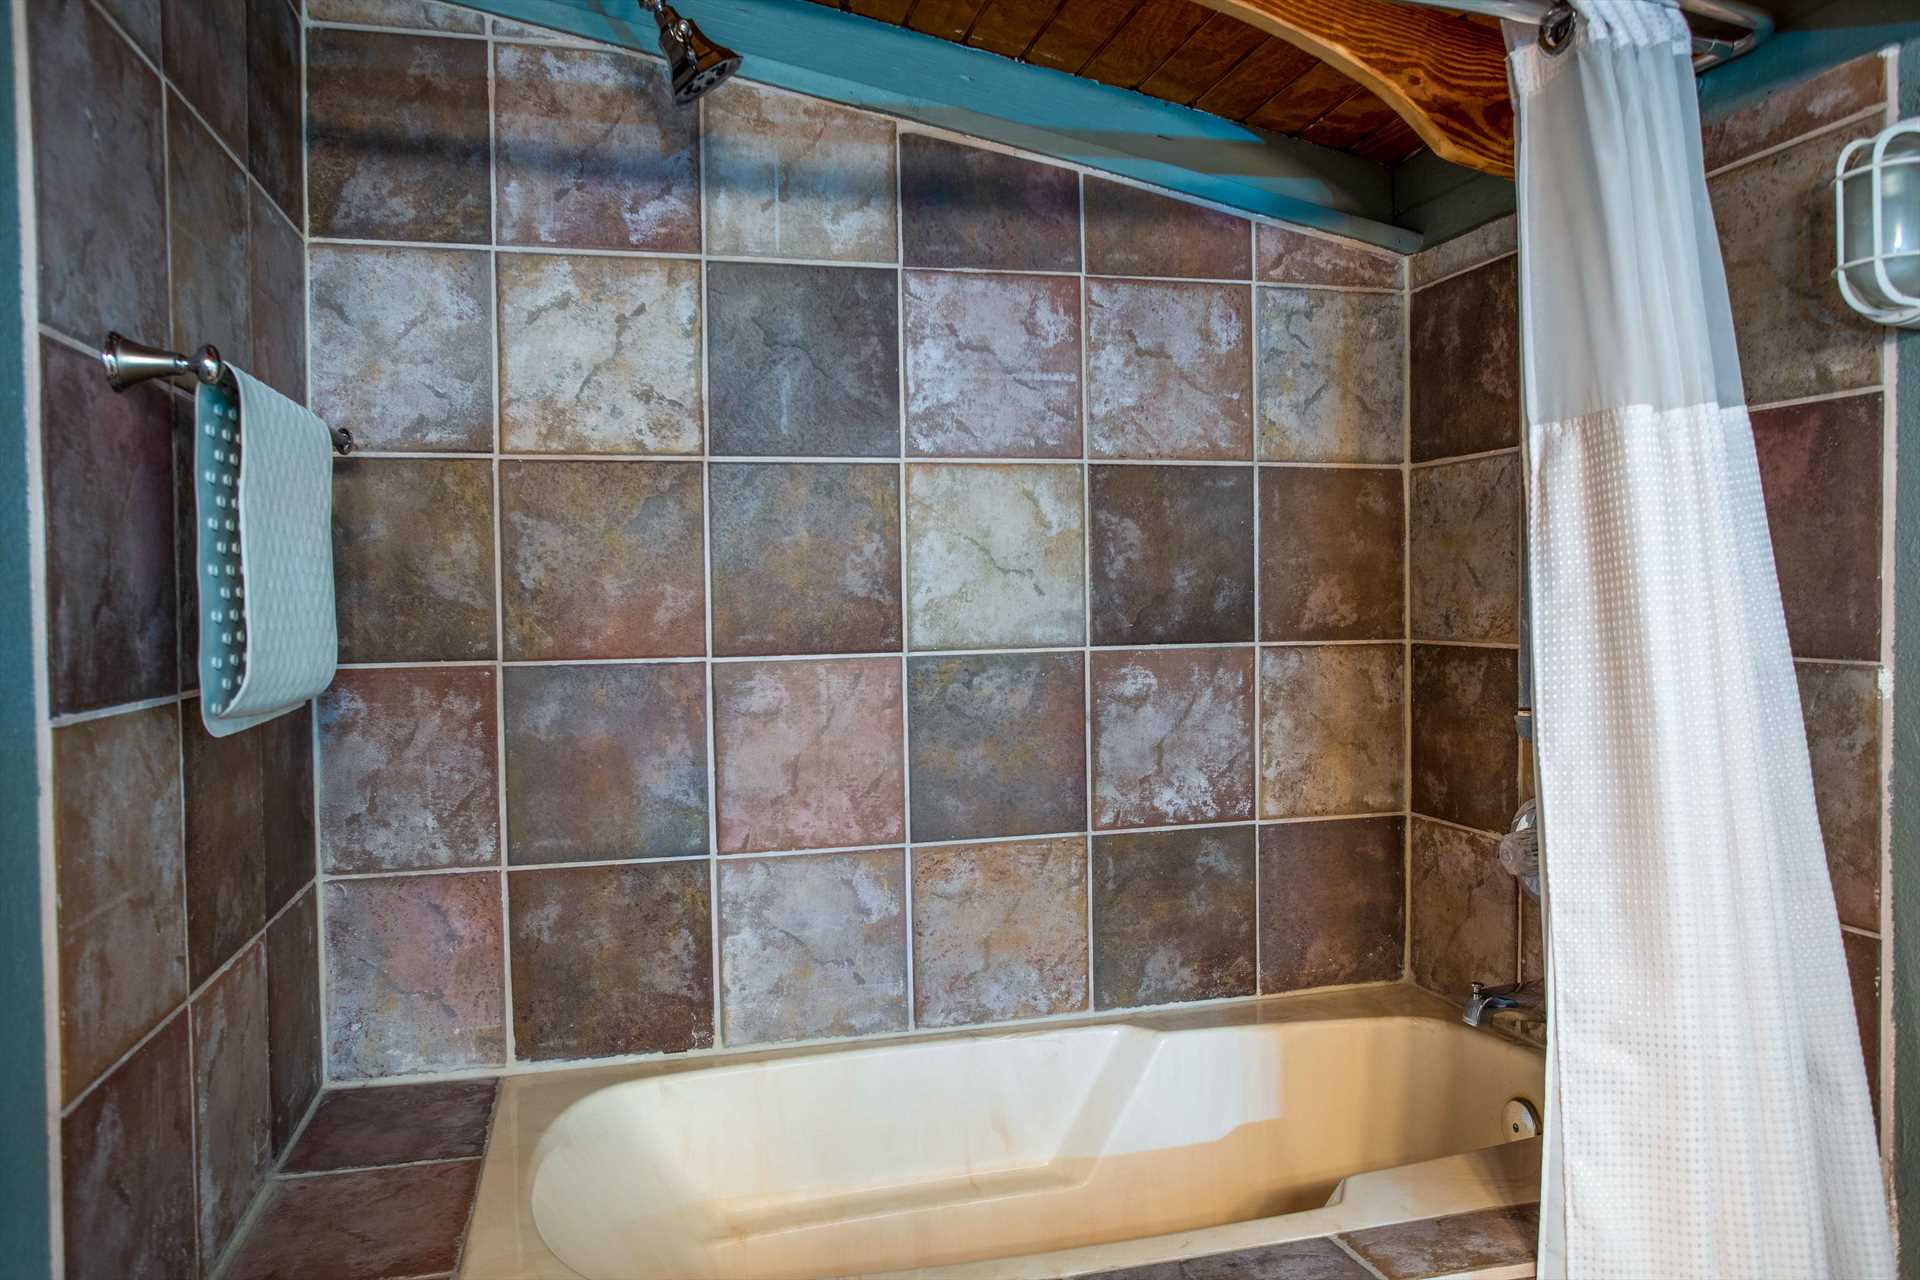                                                 Stylish tile work and a shower/tub combo make the second bath a tidy and classy cleanup space!